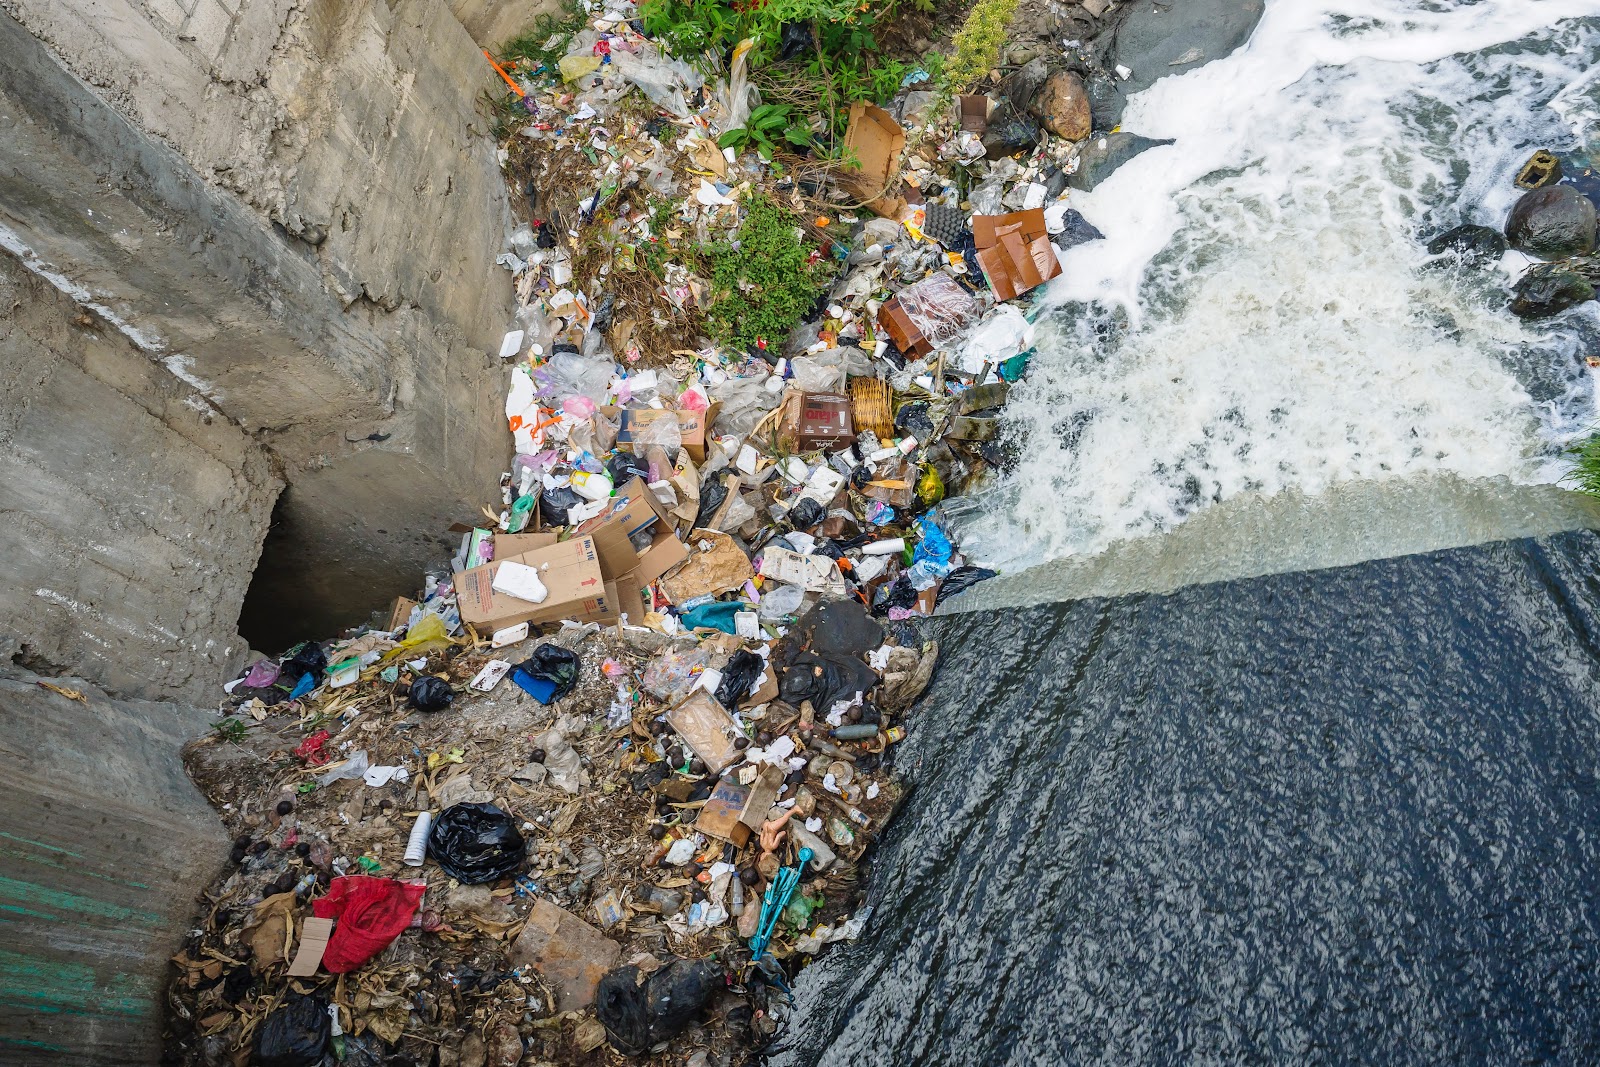 Over flowing garbage into our streams by alexander-schimmeck on unsplash